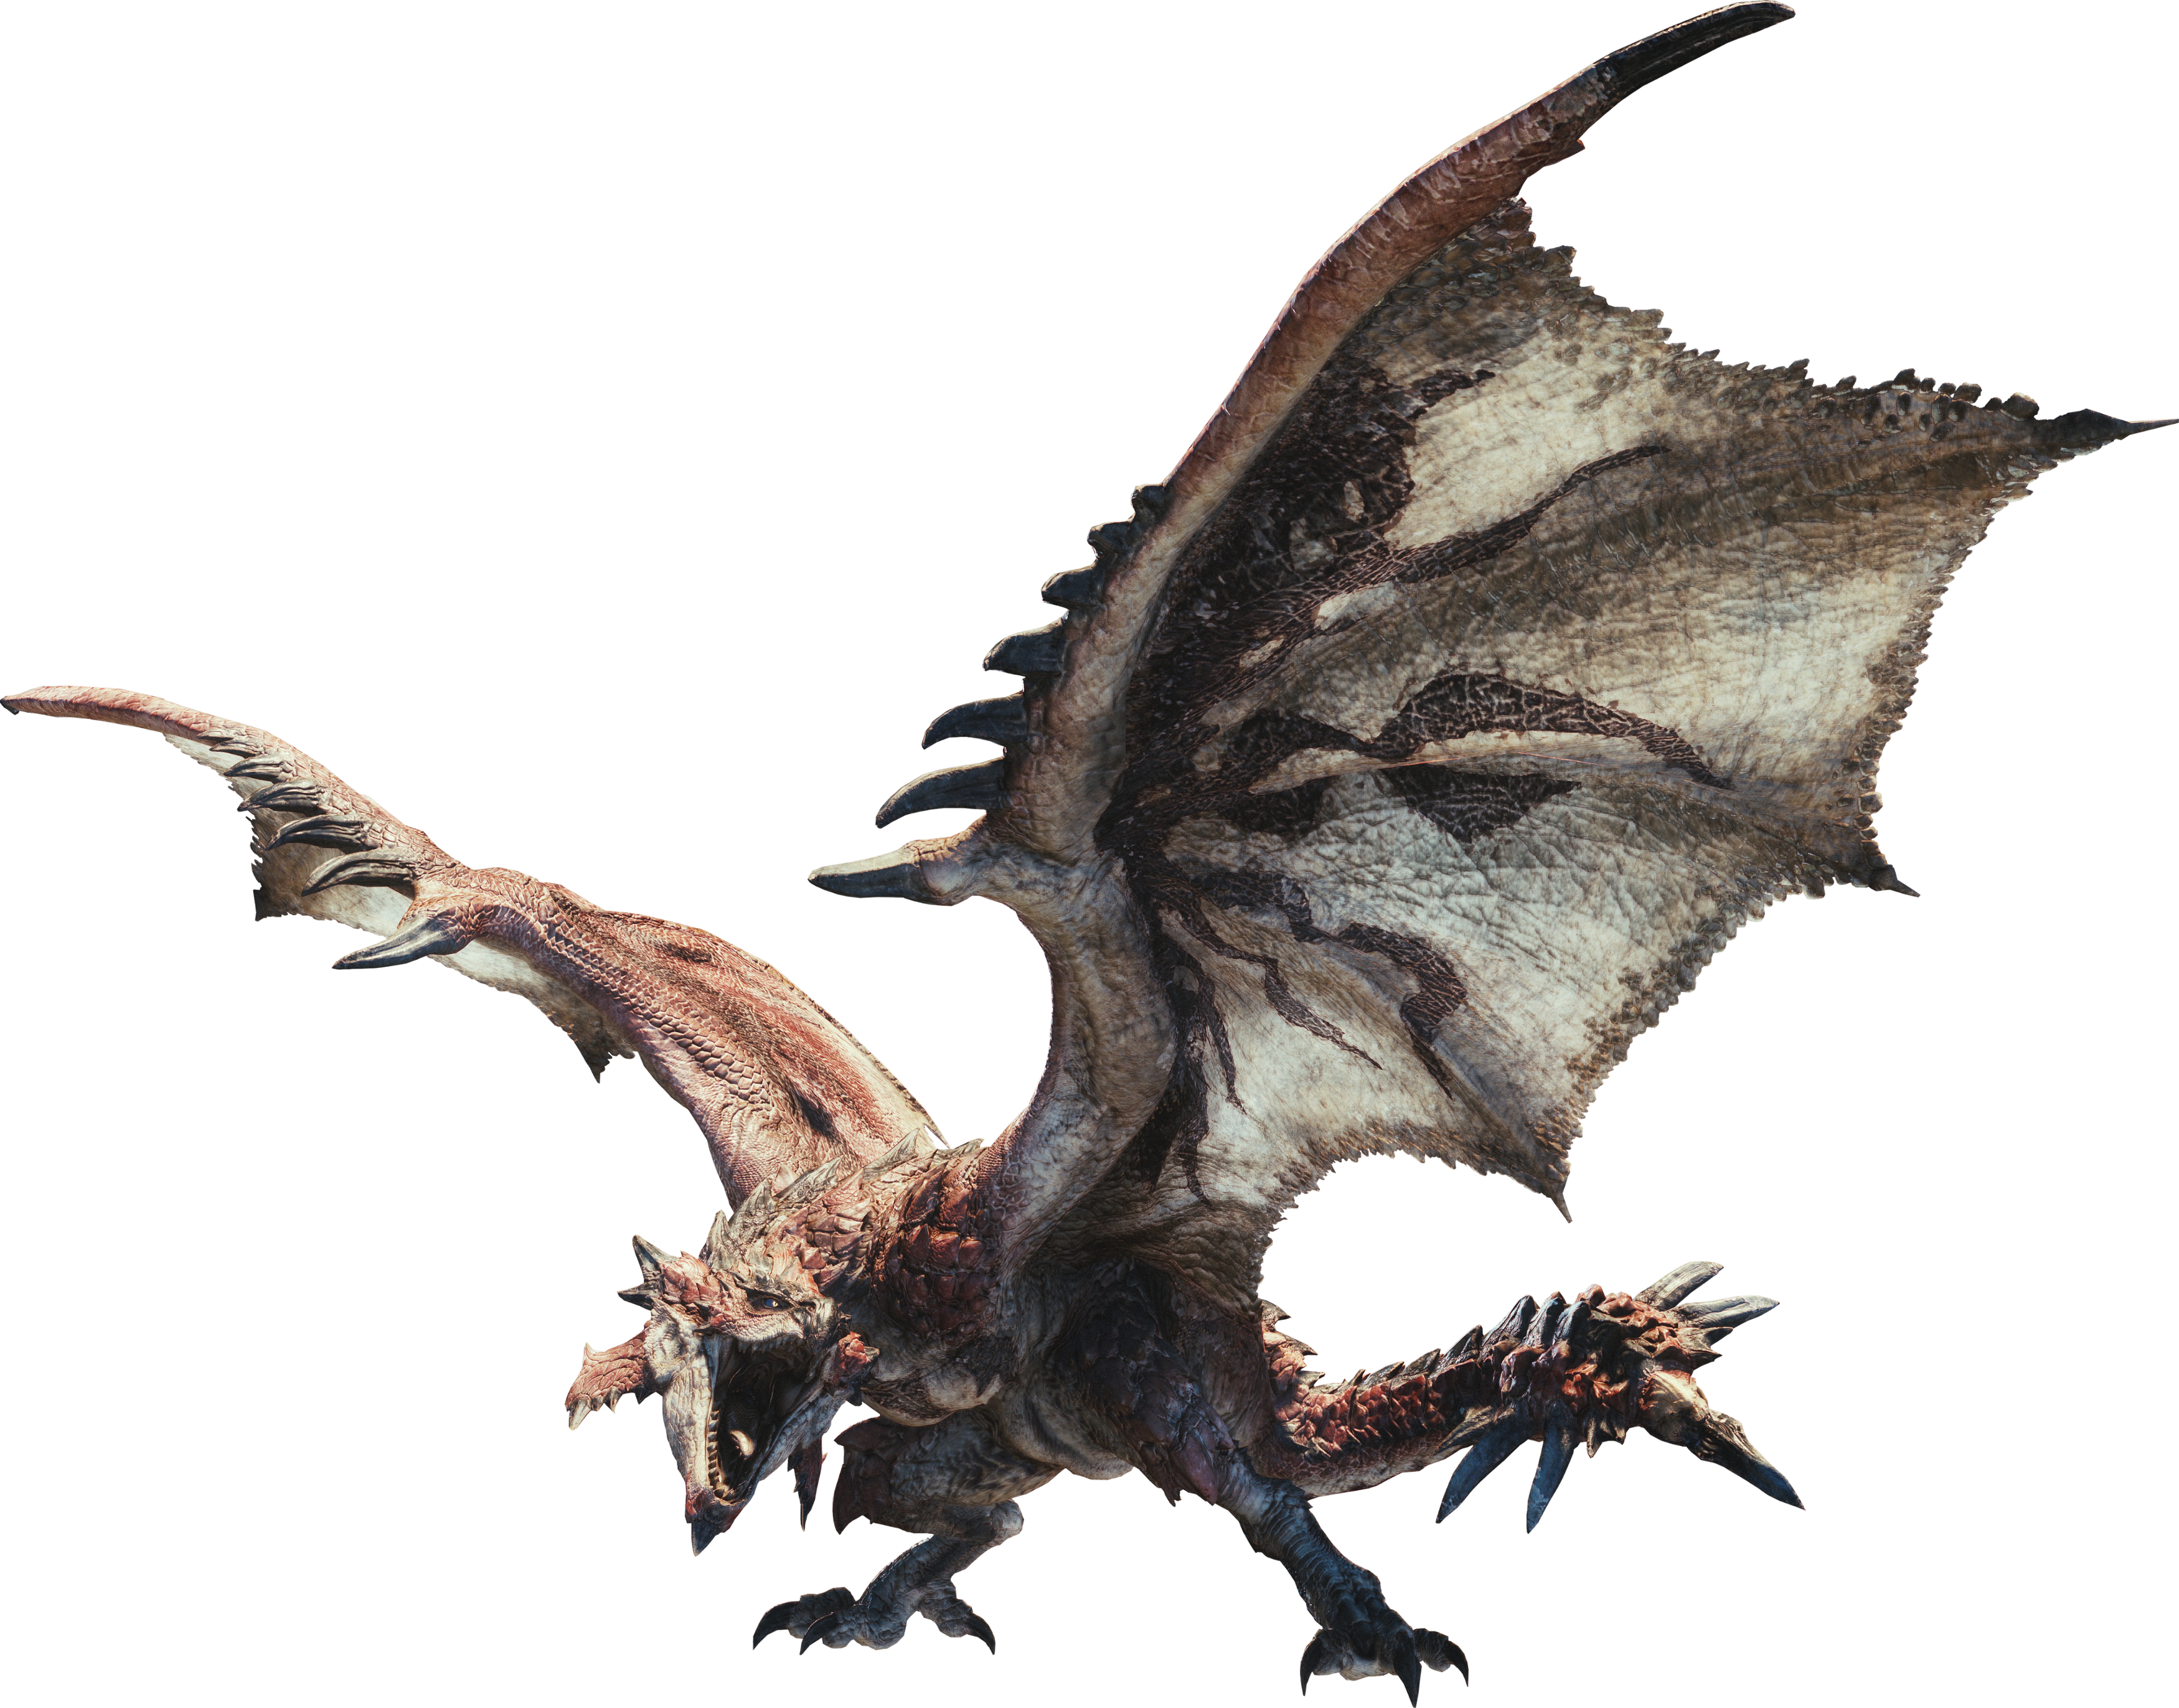 mhw monsters download free